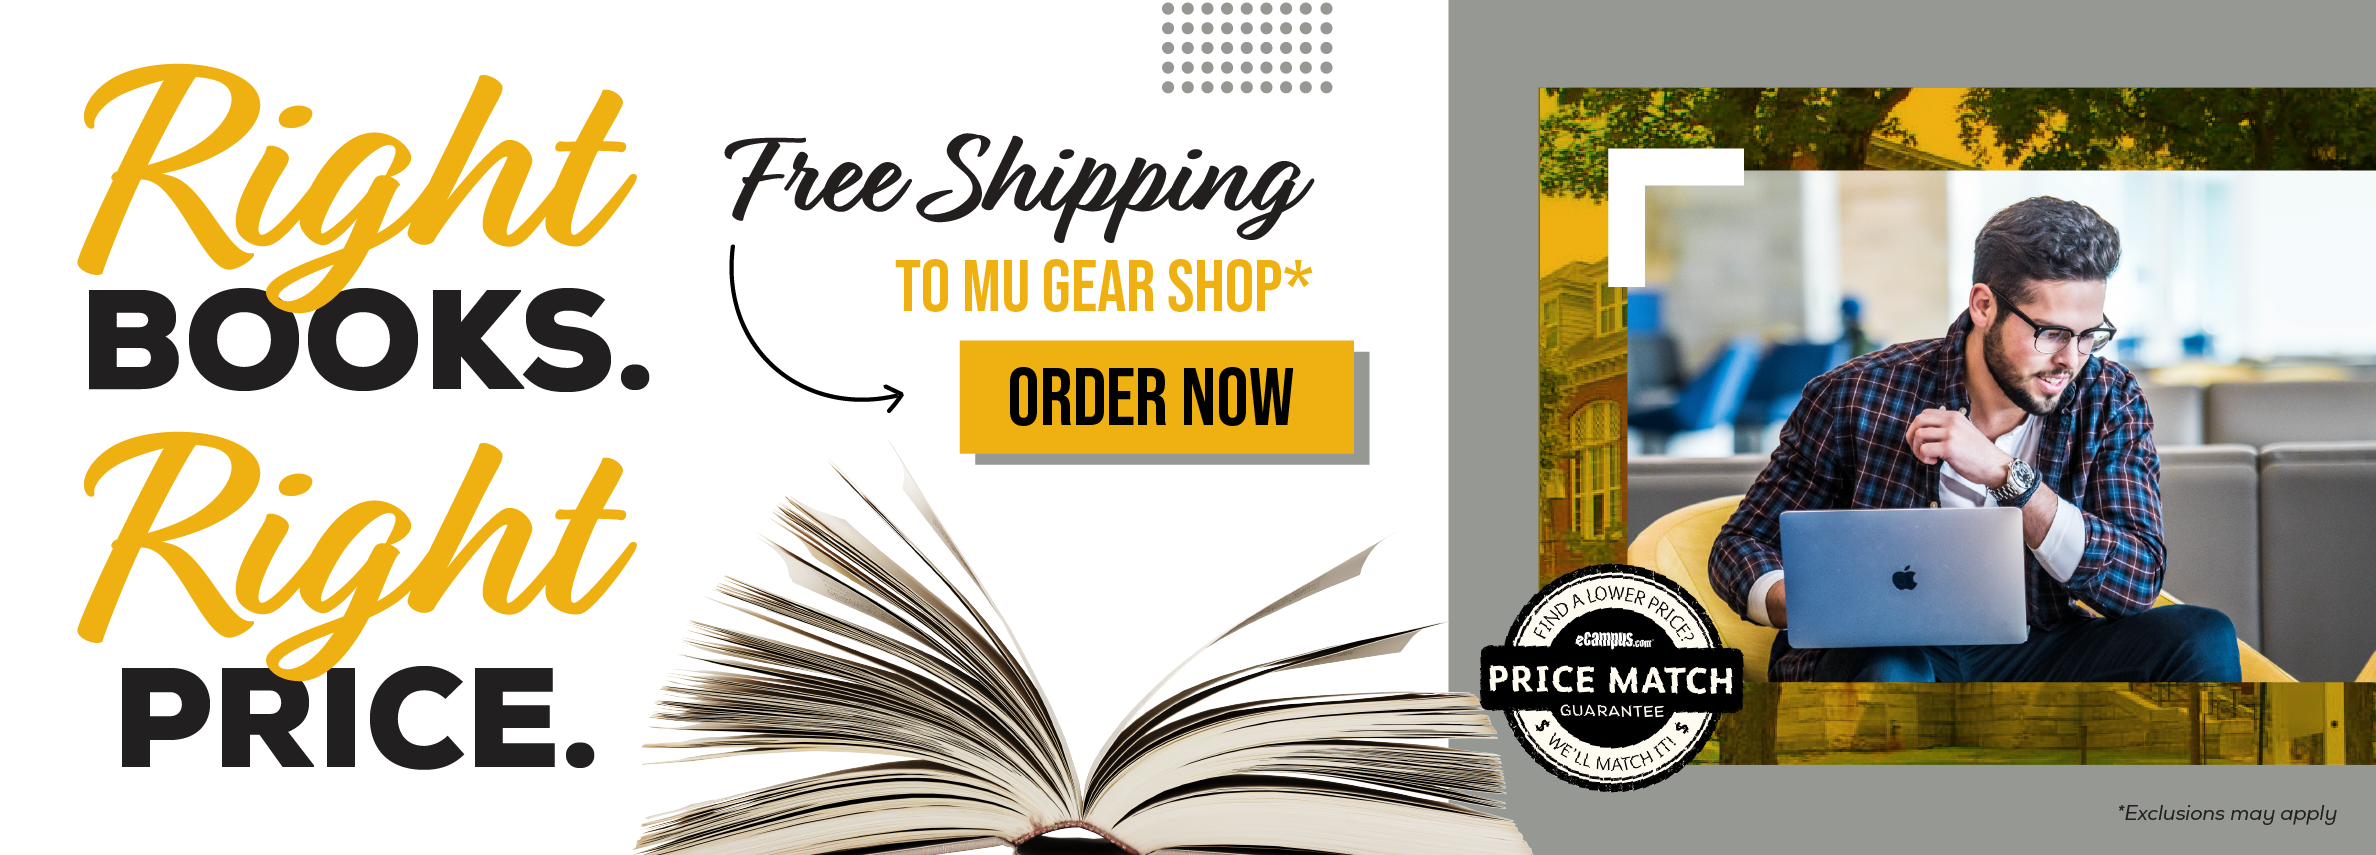 Right books. Right price. Free shipping to MU Gear Shop.* Order now. Price Match Guarantee. *Exclusions may apply.